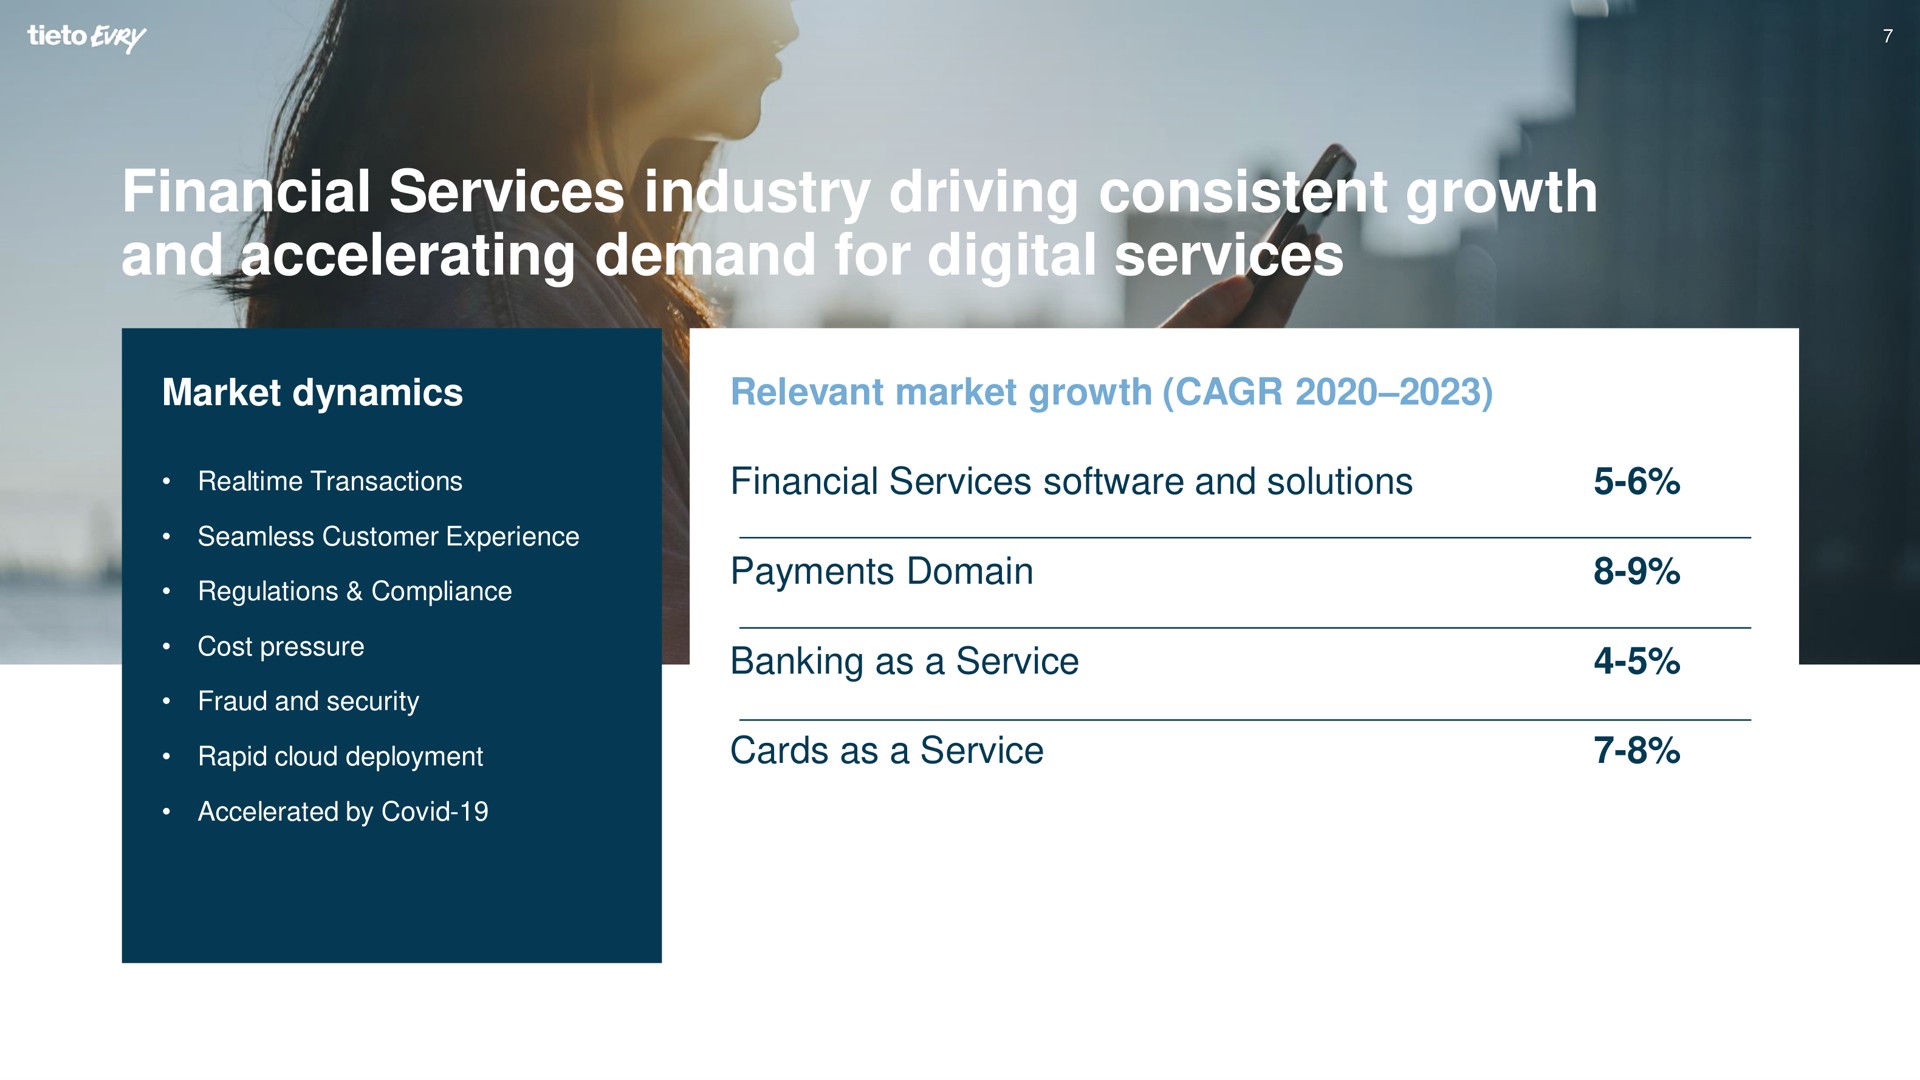 financial services industry driving consistent growth and accelerating demand for digital services | Tietoevry